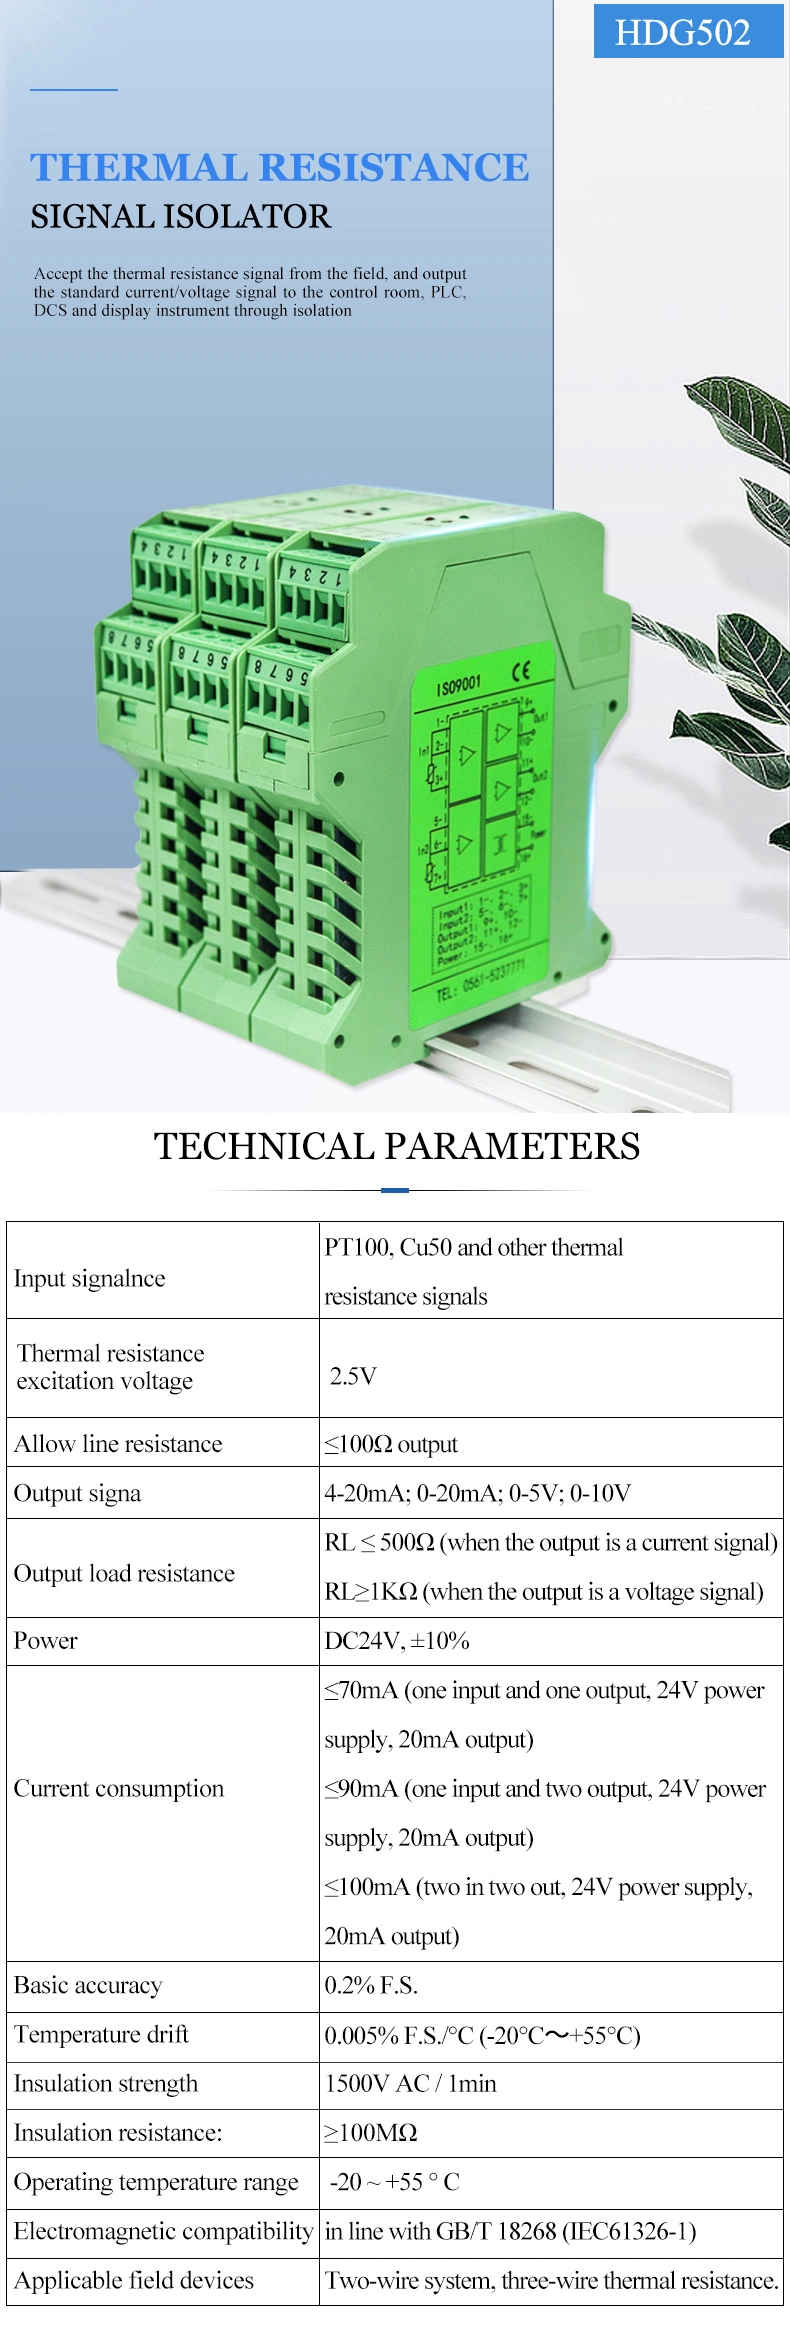 Analog Signal 0-10V 4 20mA Output Thermal Resistance Cu50 PT100 Temperature Transmitter Signal Isolator